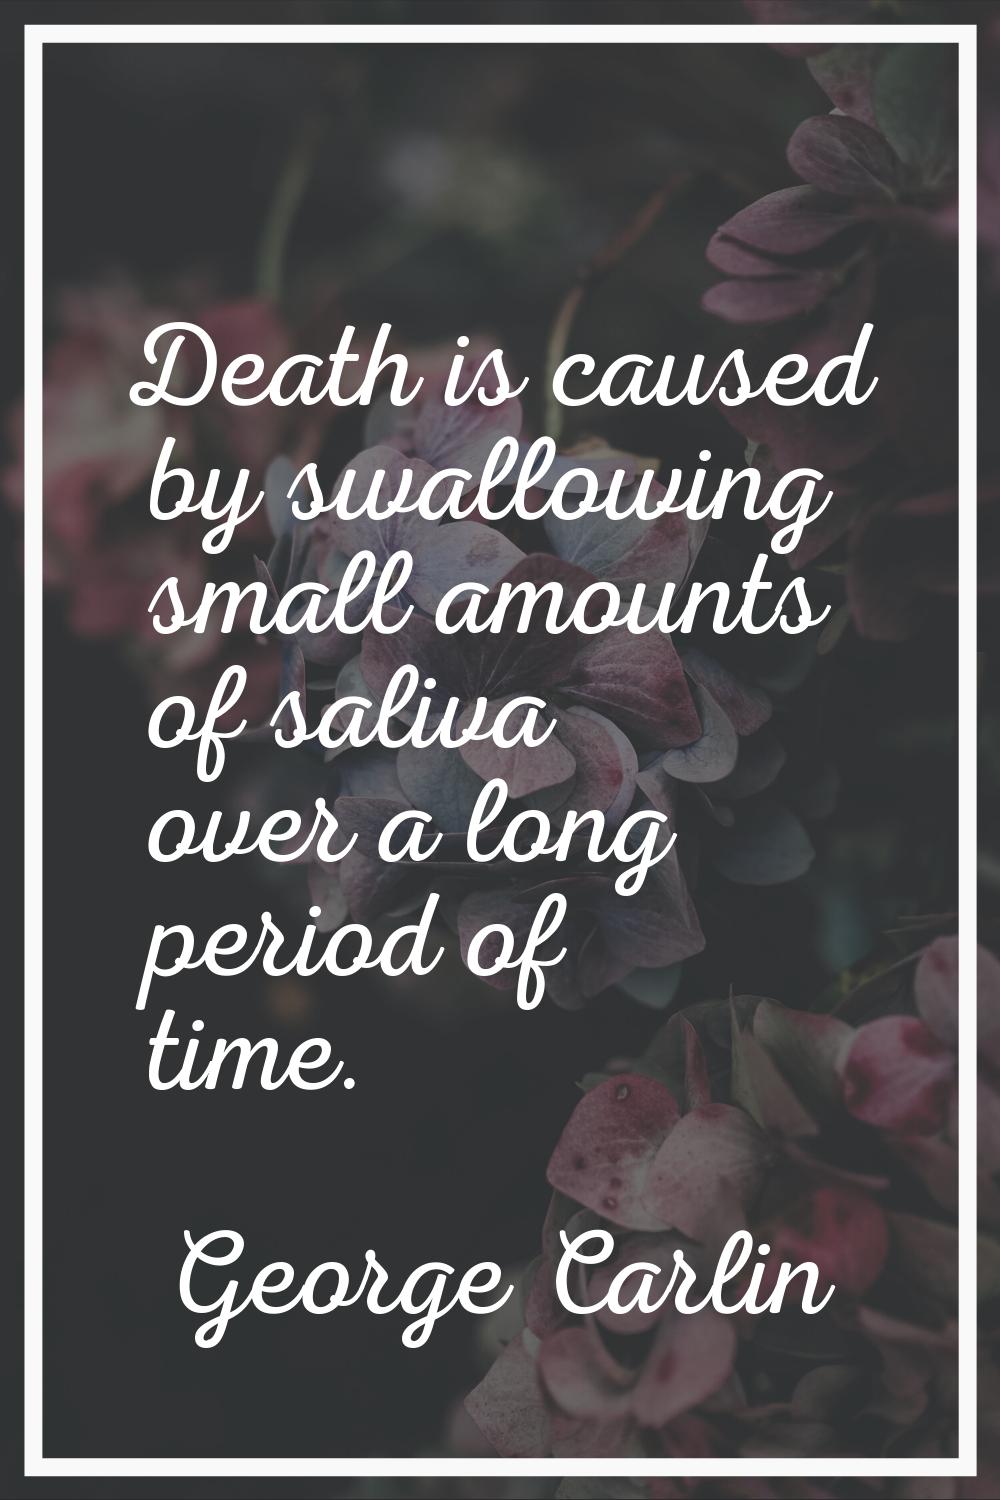 Death is caused by swallowing small amounts of saliva over a long period of time.